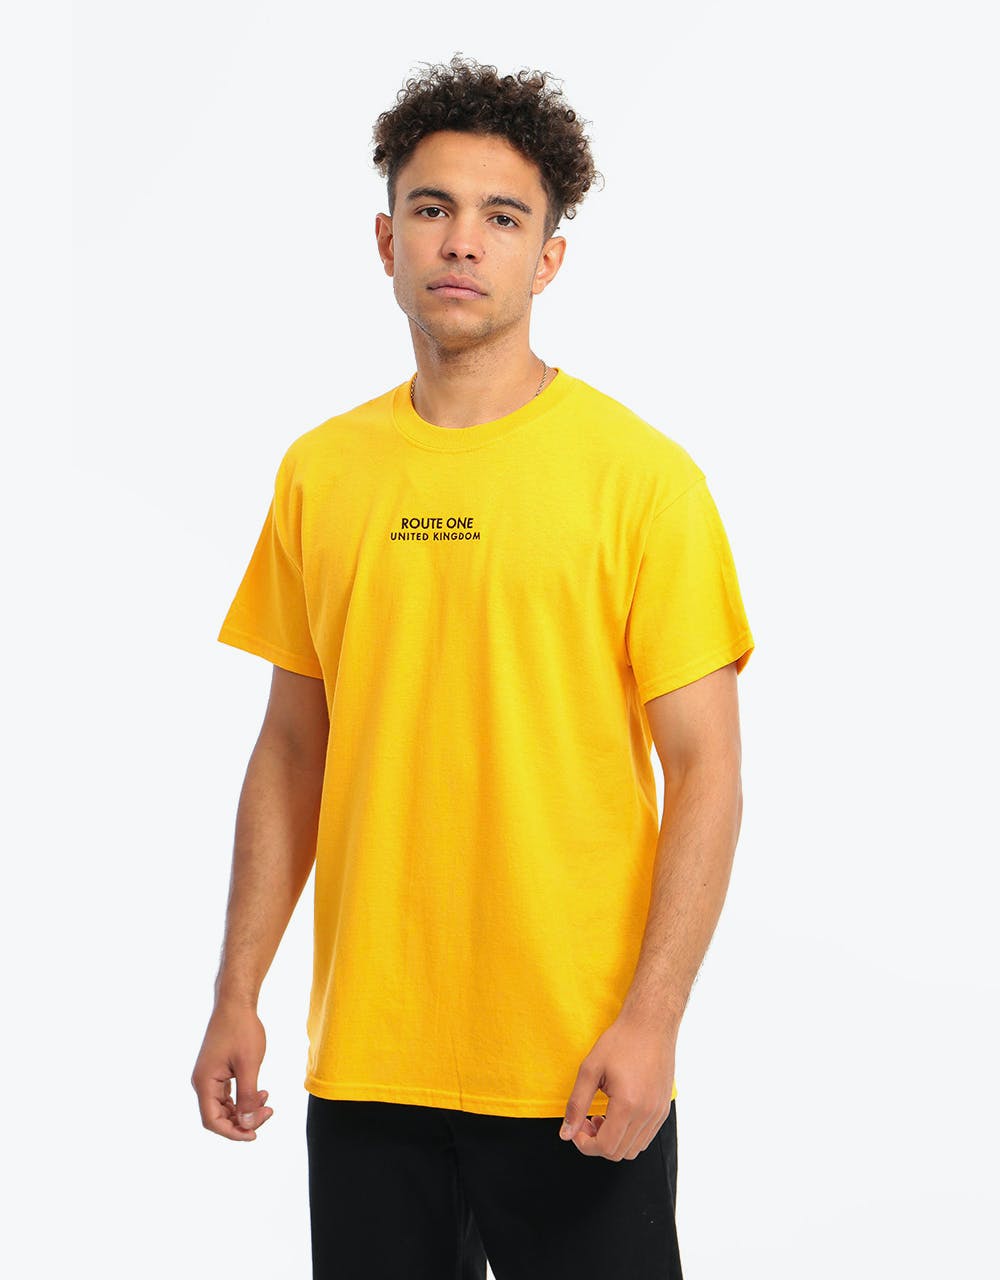 Route One In Bloom T-Shirt - Gold